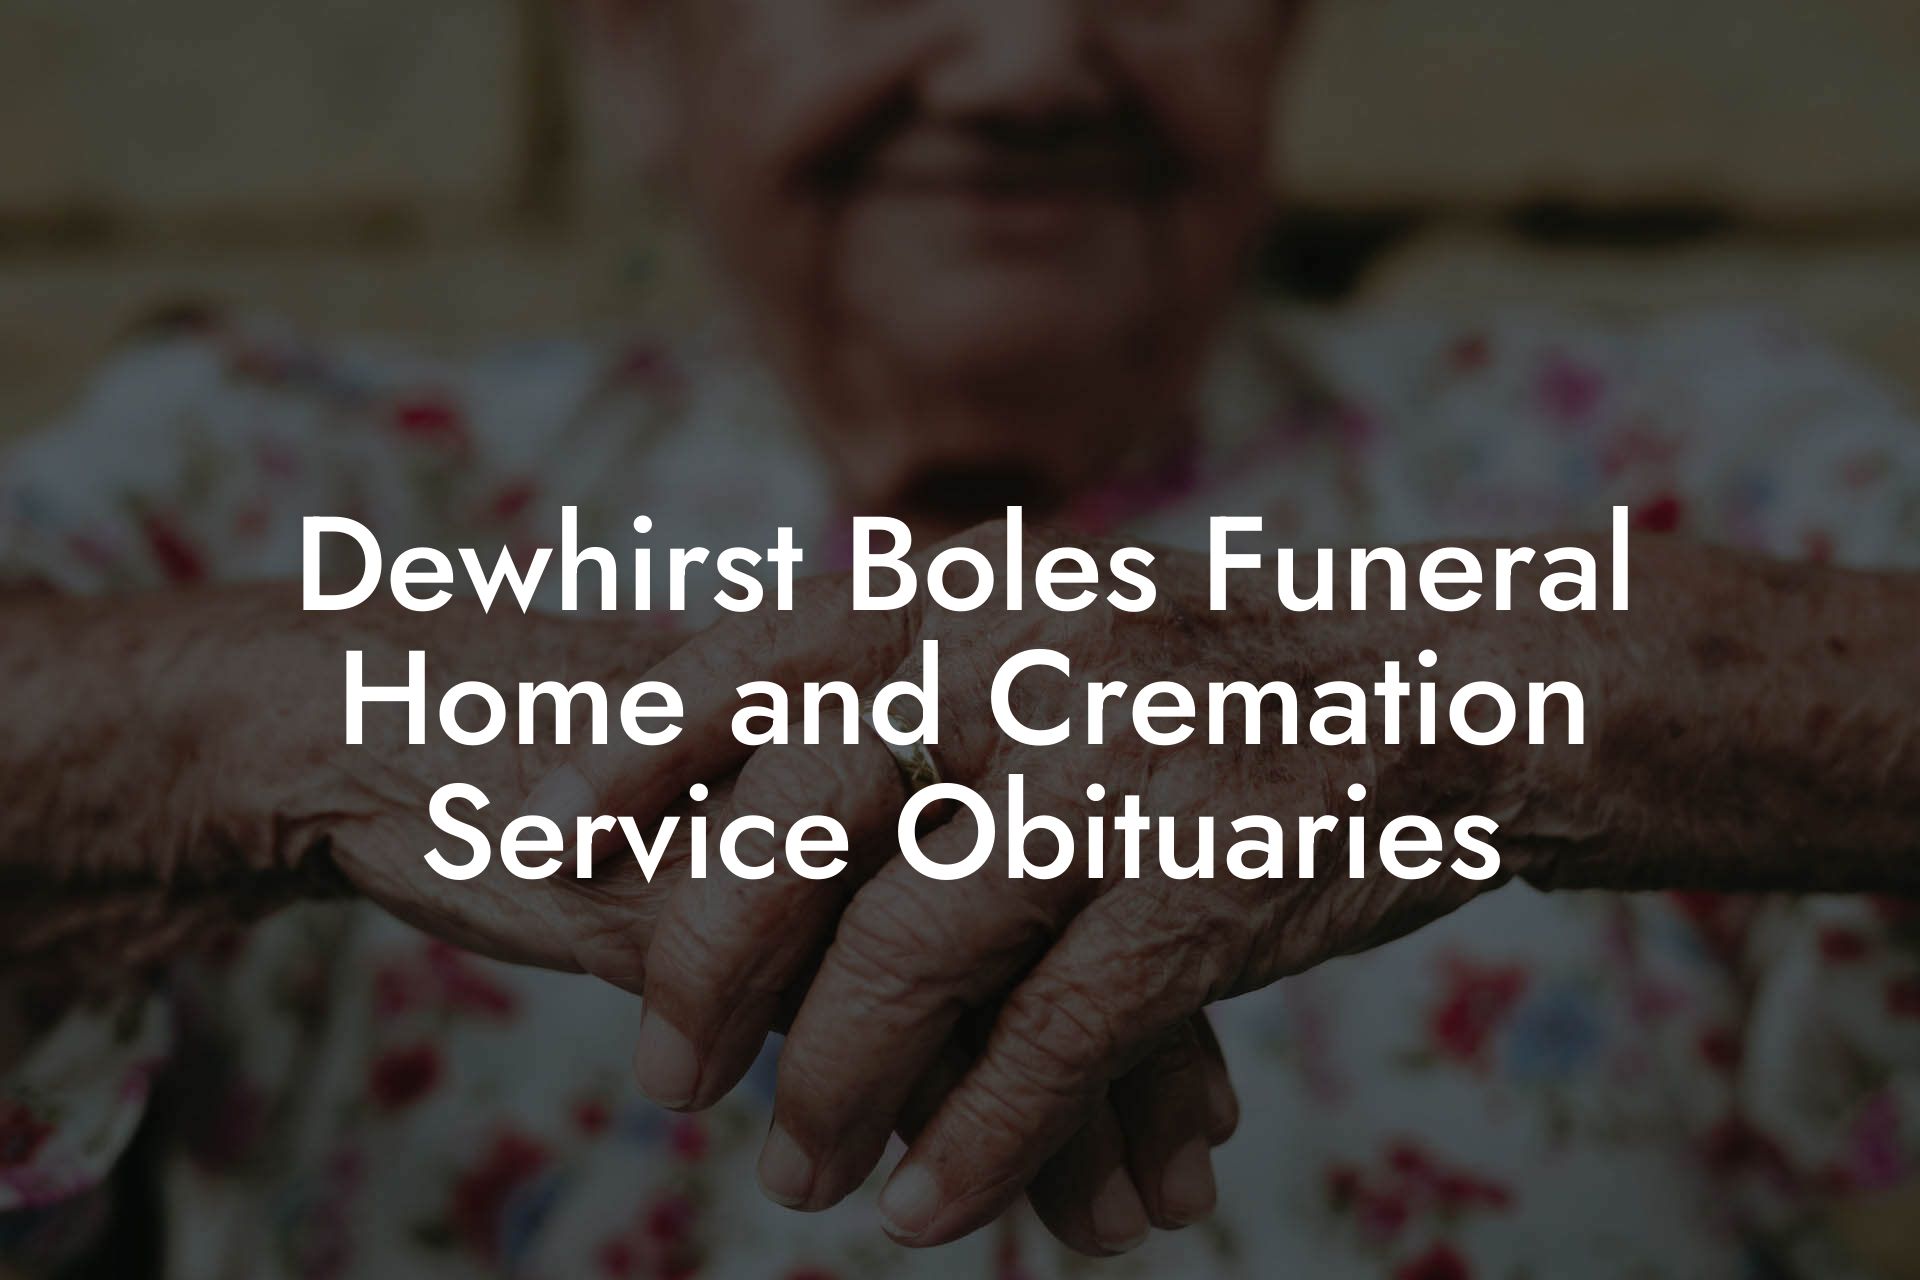 Dewhirst Boles Funeral Home and Cremation Service Obituaries